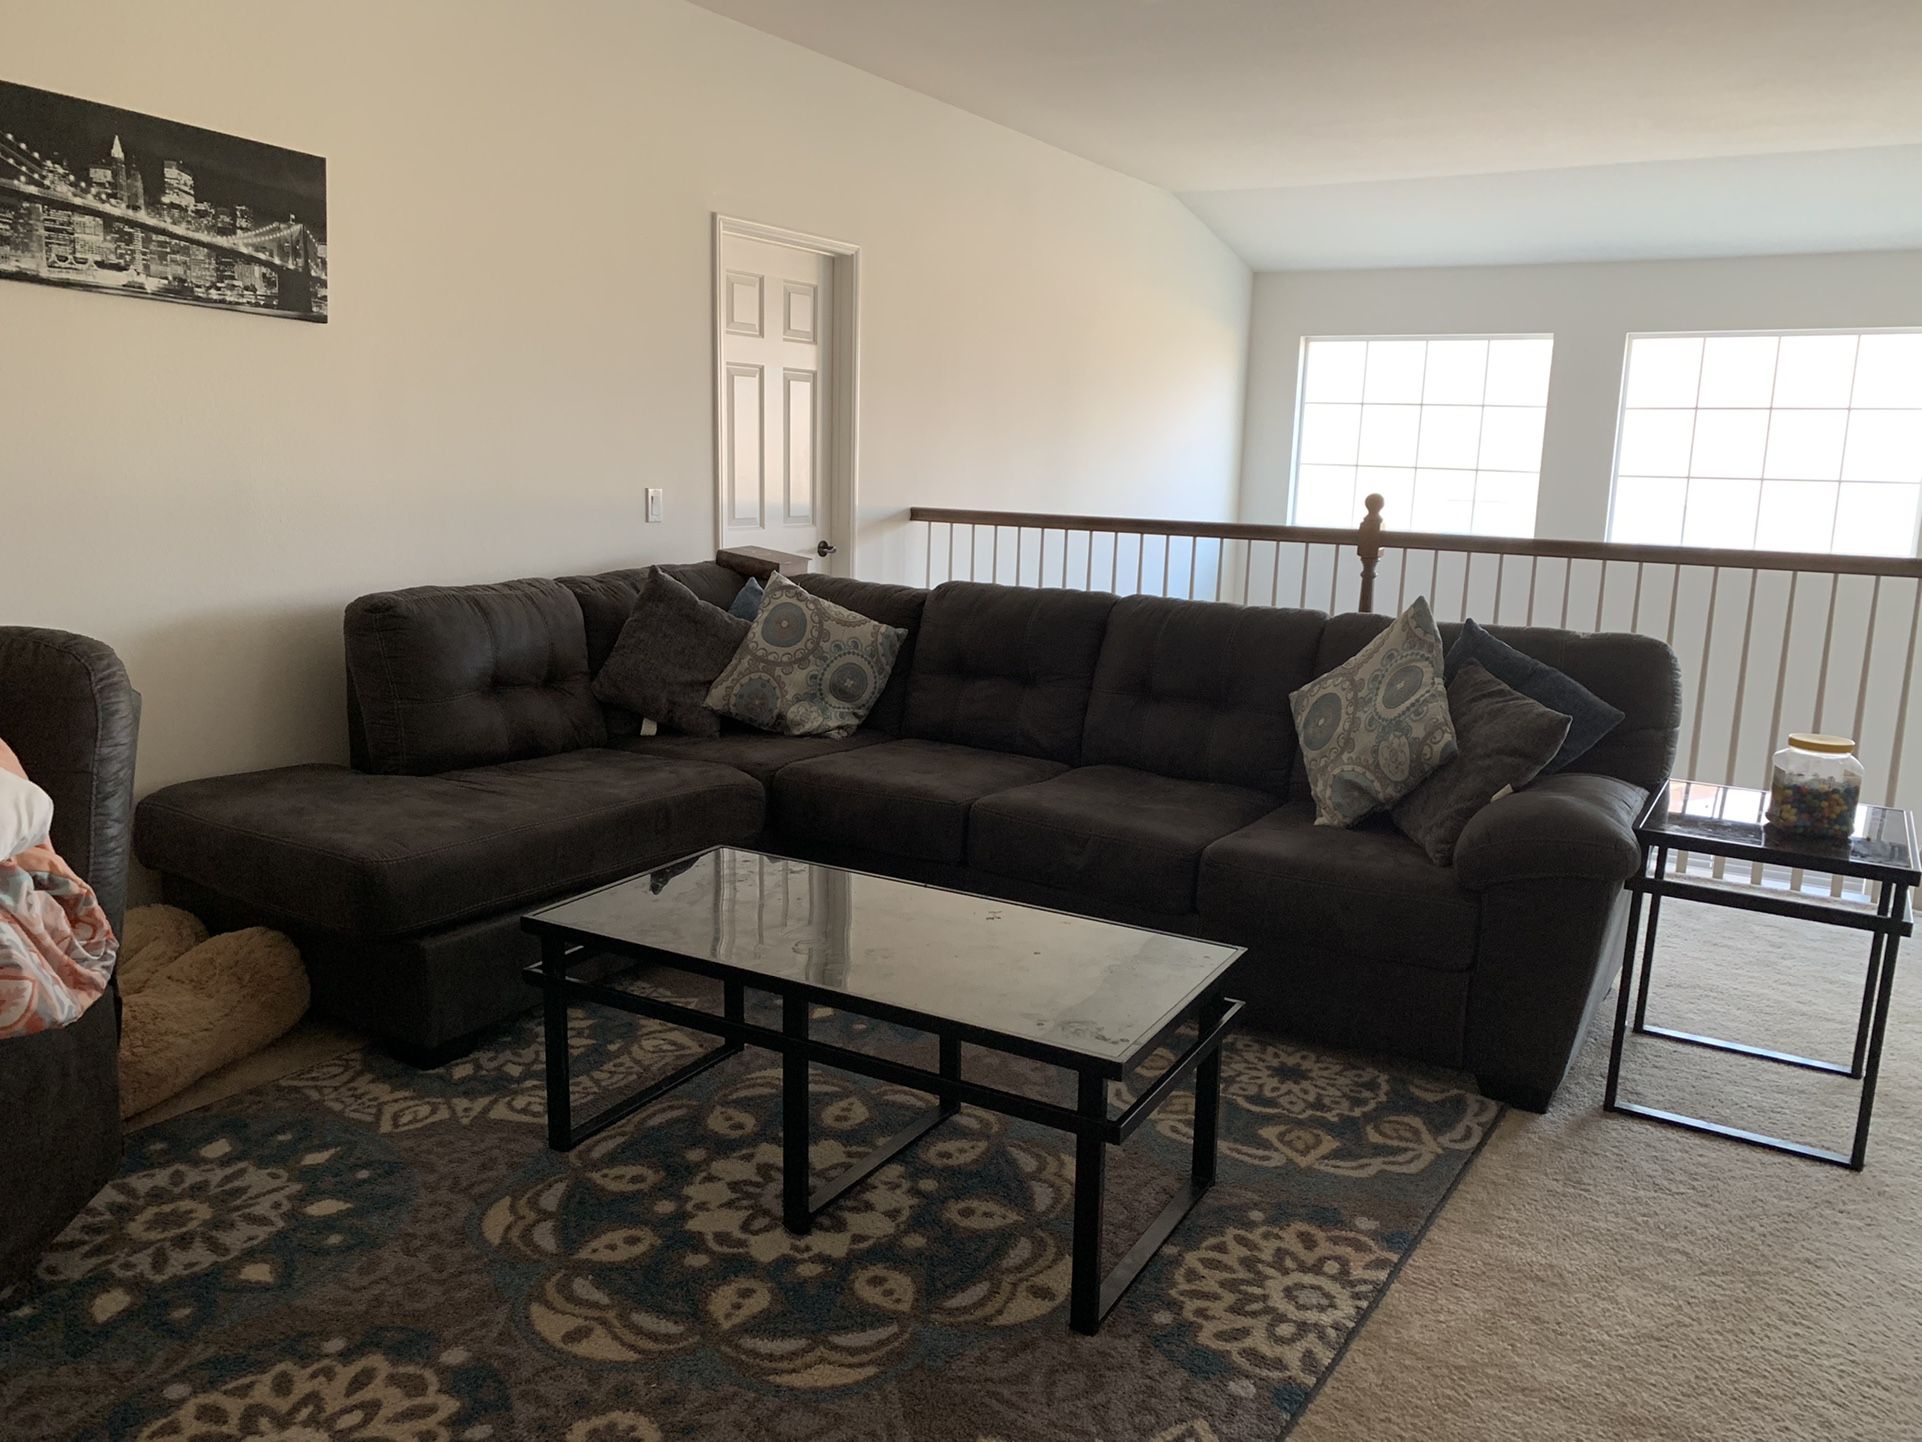 Sectional, Ottoman, 3 Matching Black Accent Tables, Rocking Chair, & Area Rug